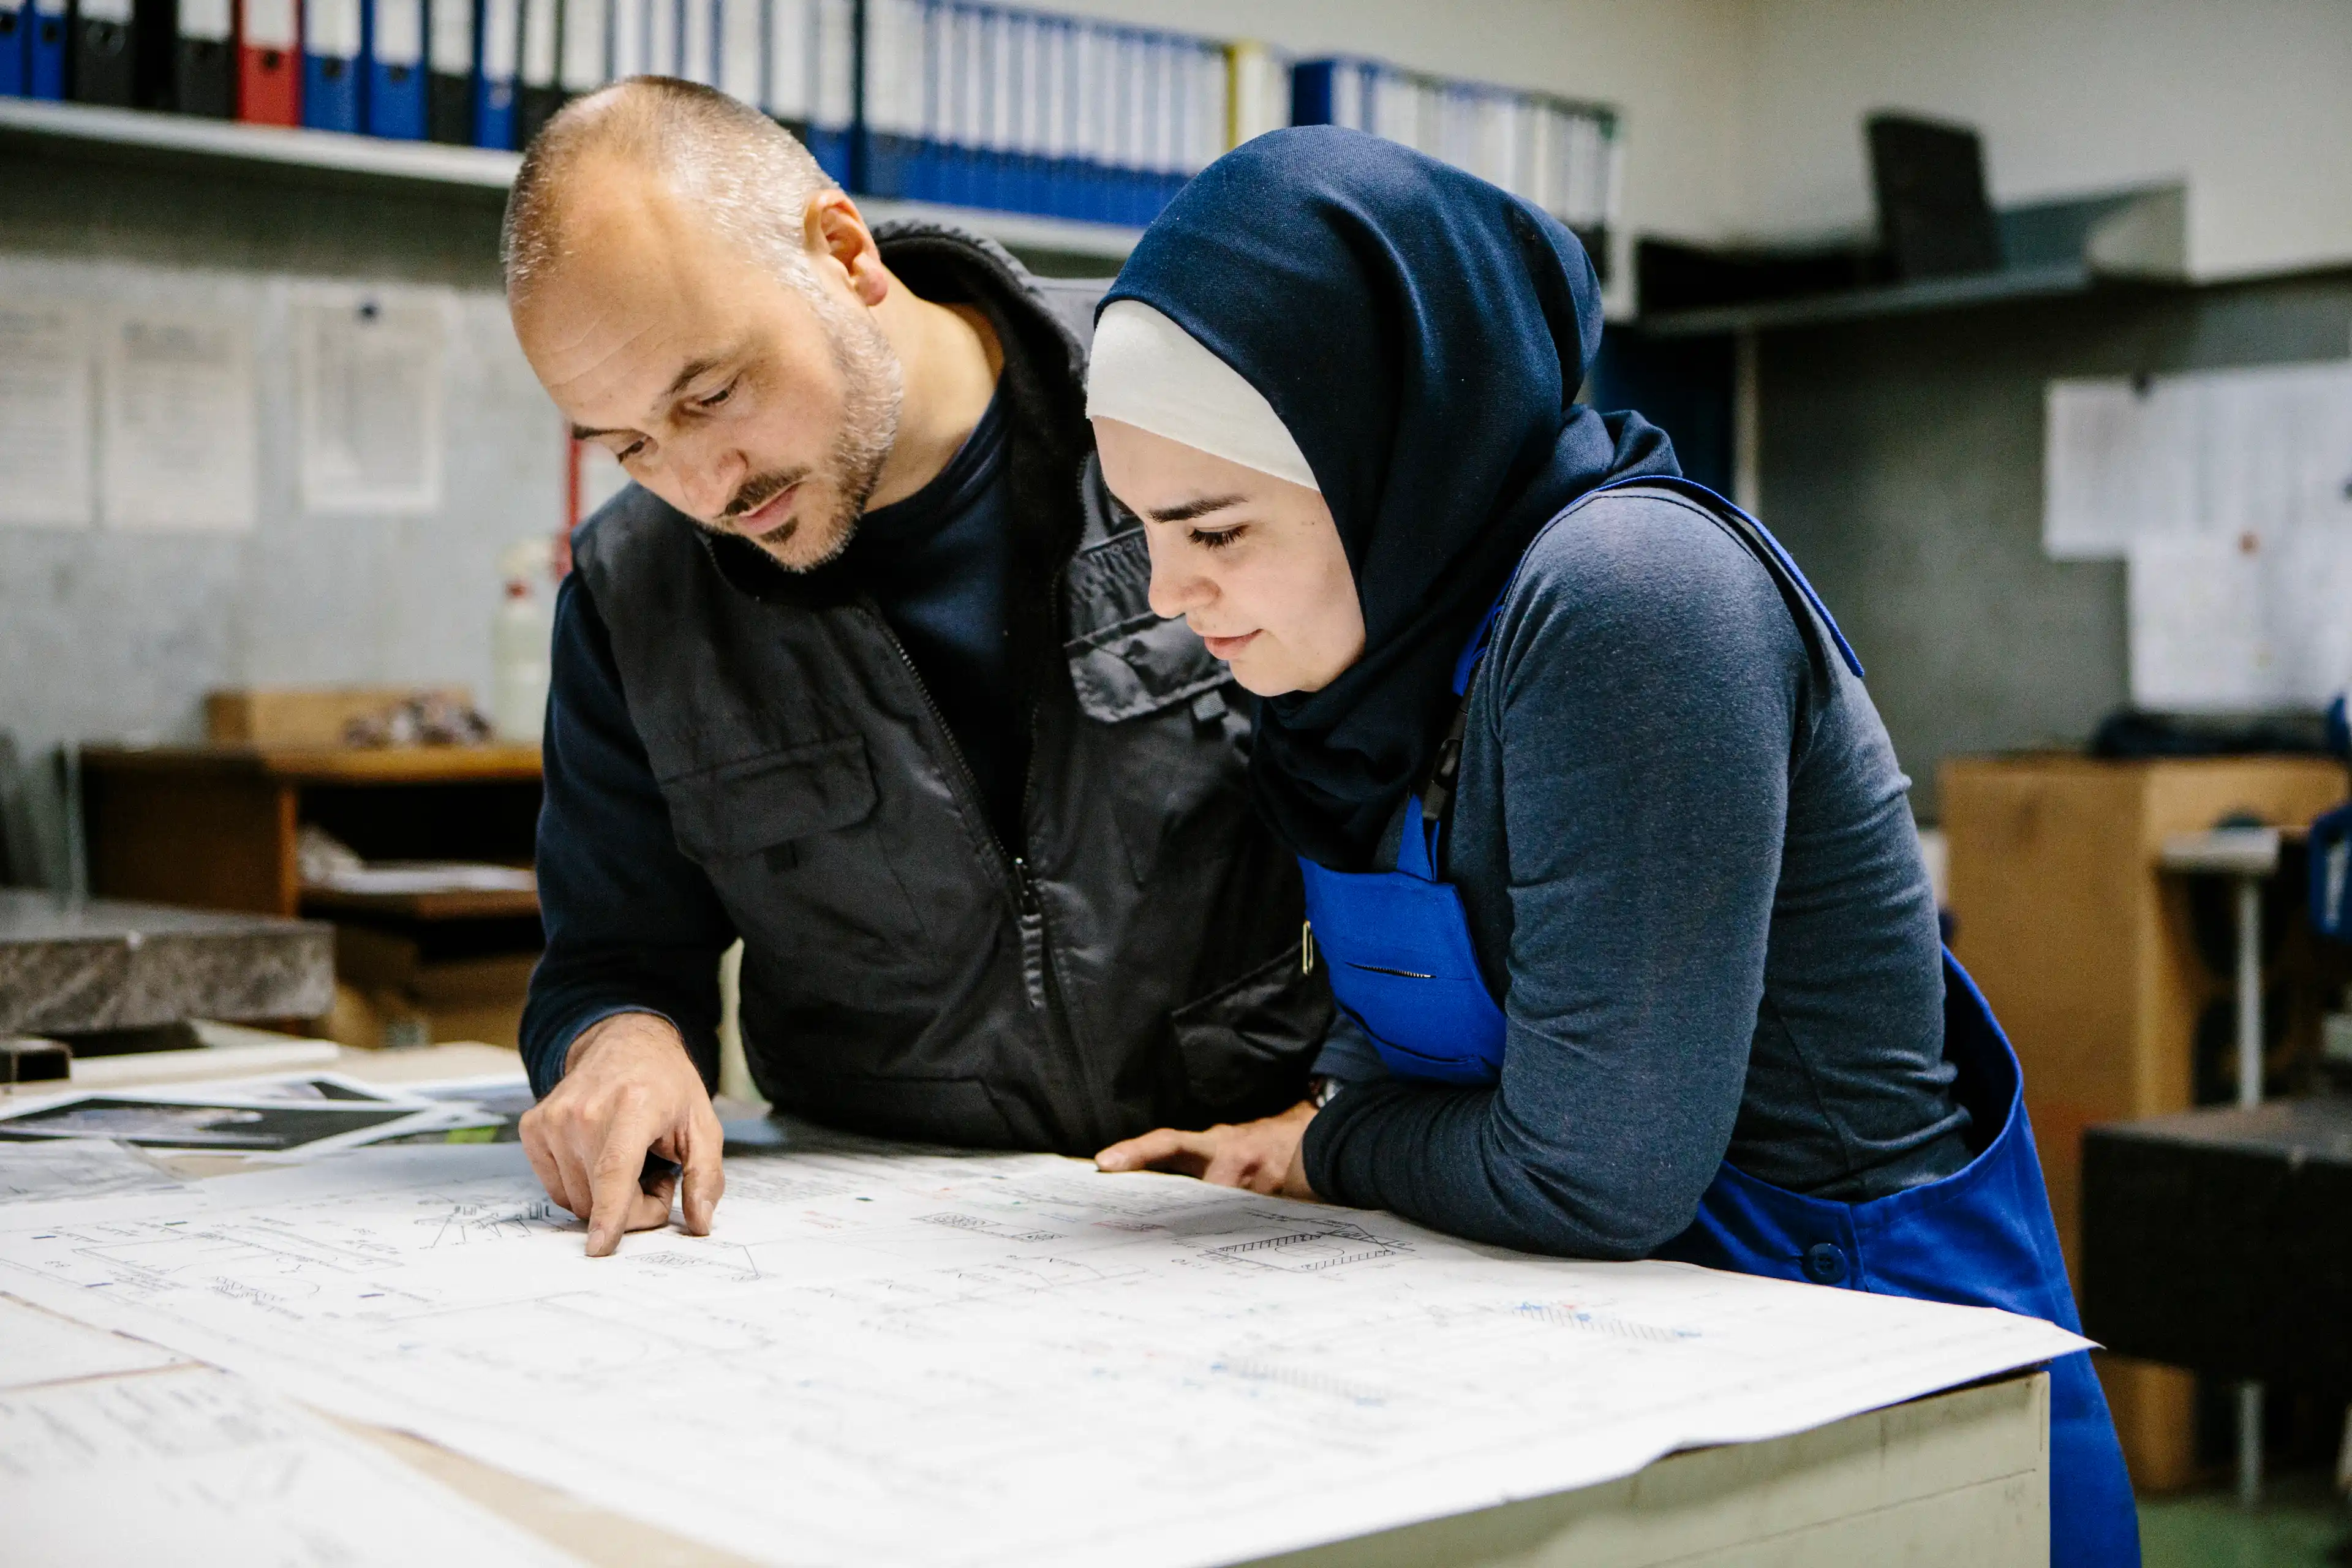 Two people looking at a diagram